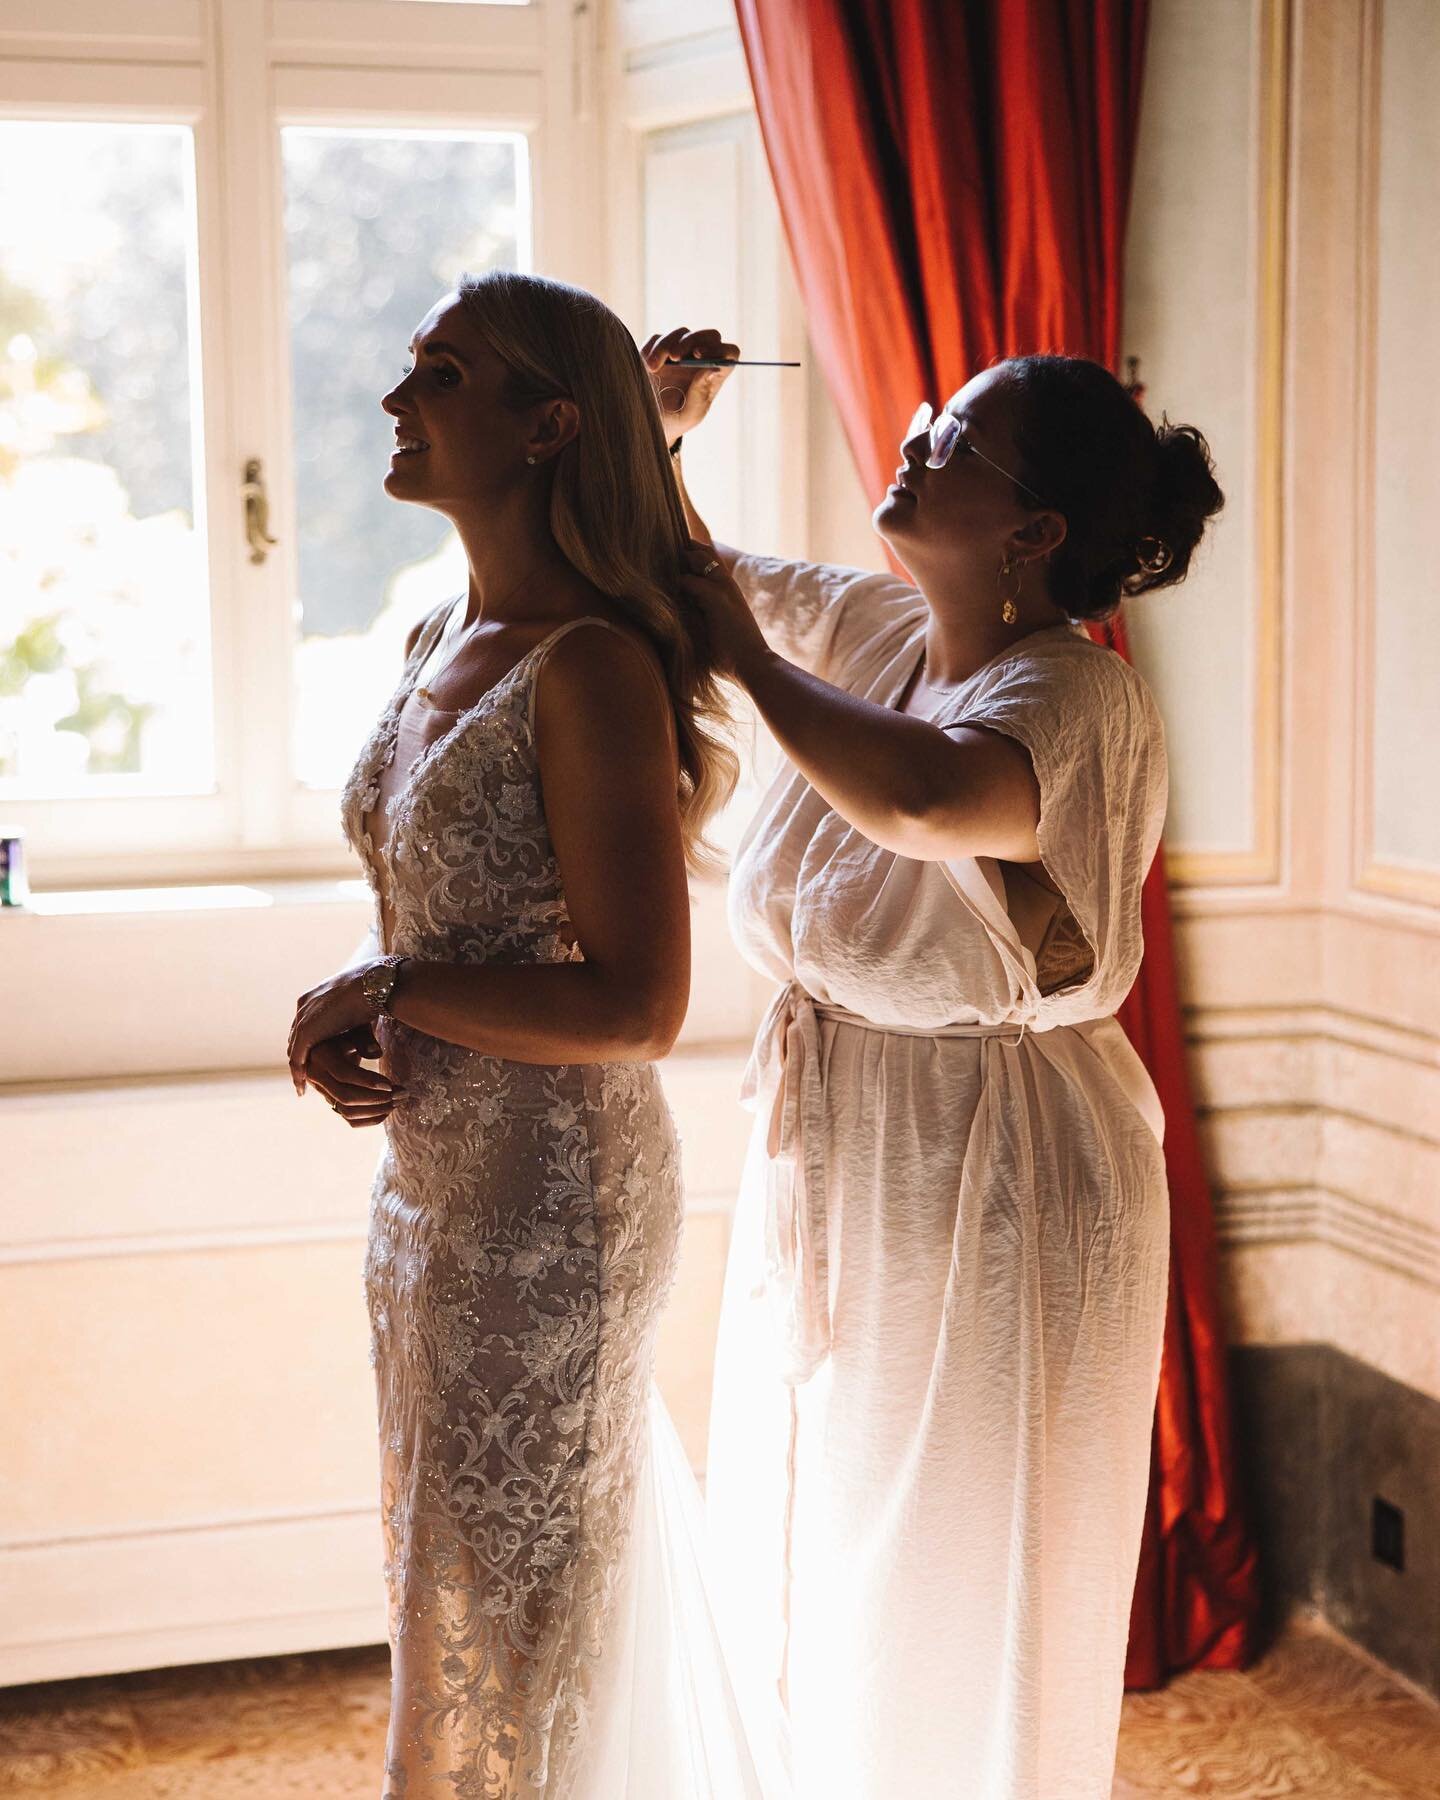 Some beautiful moments finishing off Francesca&rsquo;s beautiful bridal look for her Villa Balbiano Dream day 🙌🏻🇮🇹💖

Thankyou @daphotography_snapper for capturing these moments so perfectly 😘

Venue - @villa_balbiano
Destination Wedding Planner